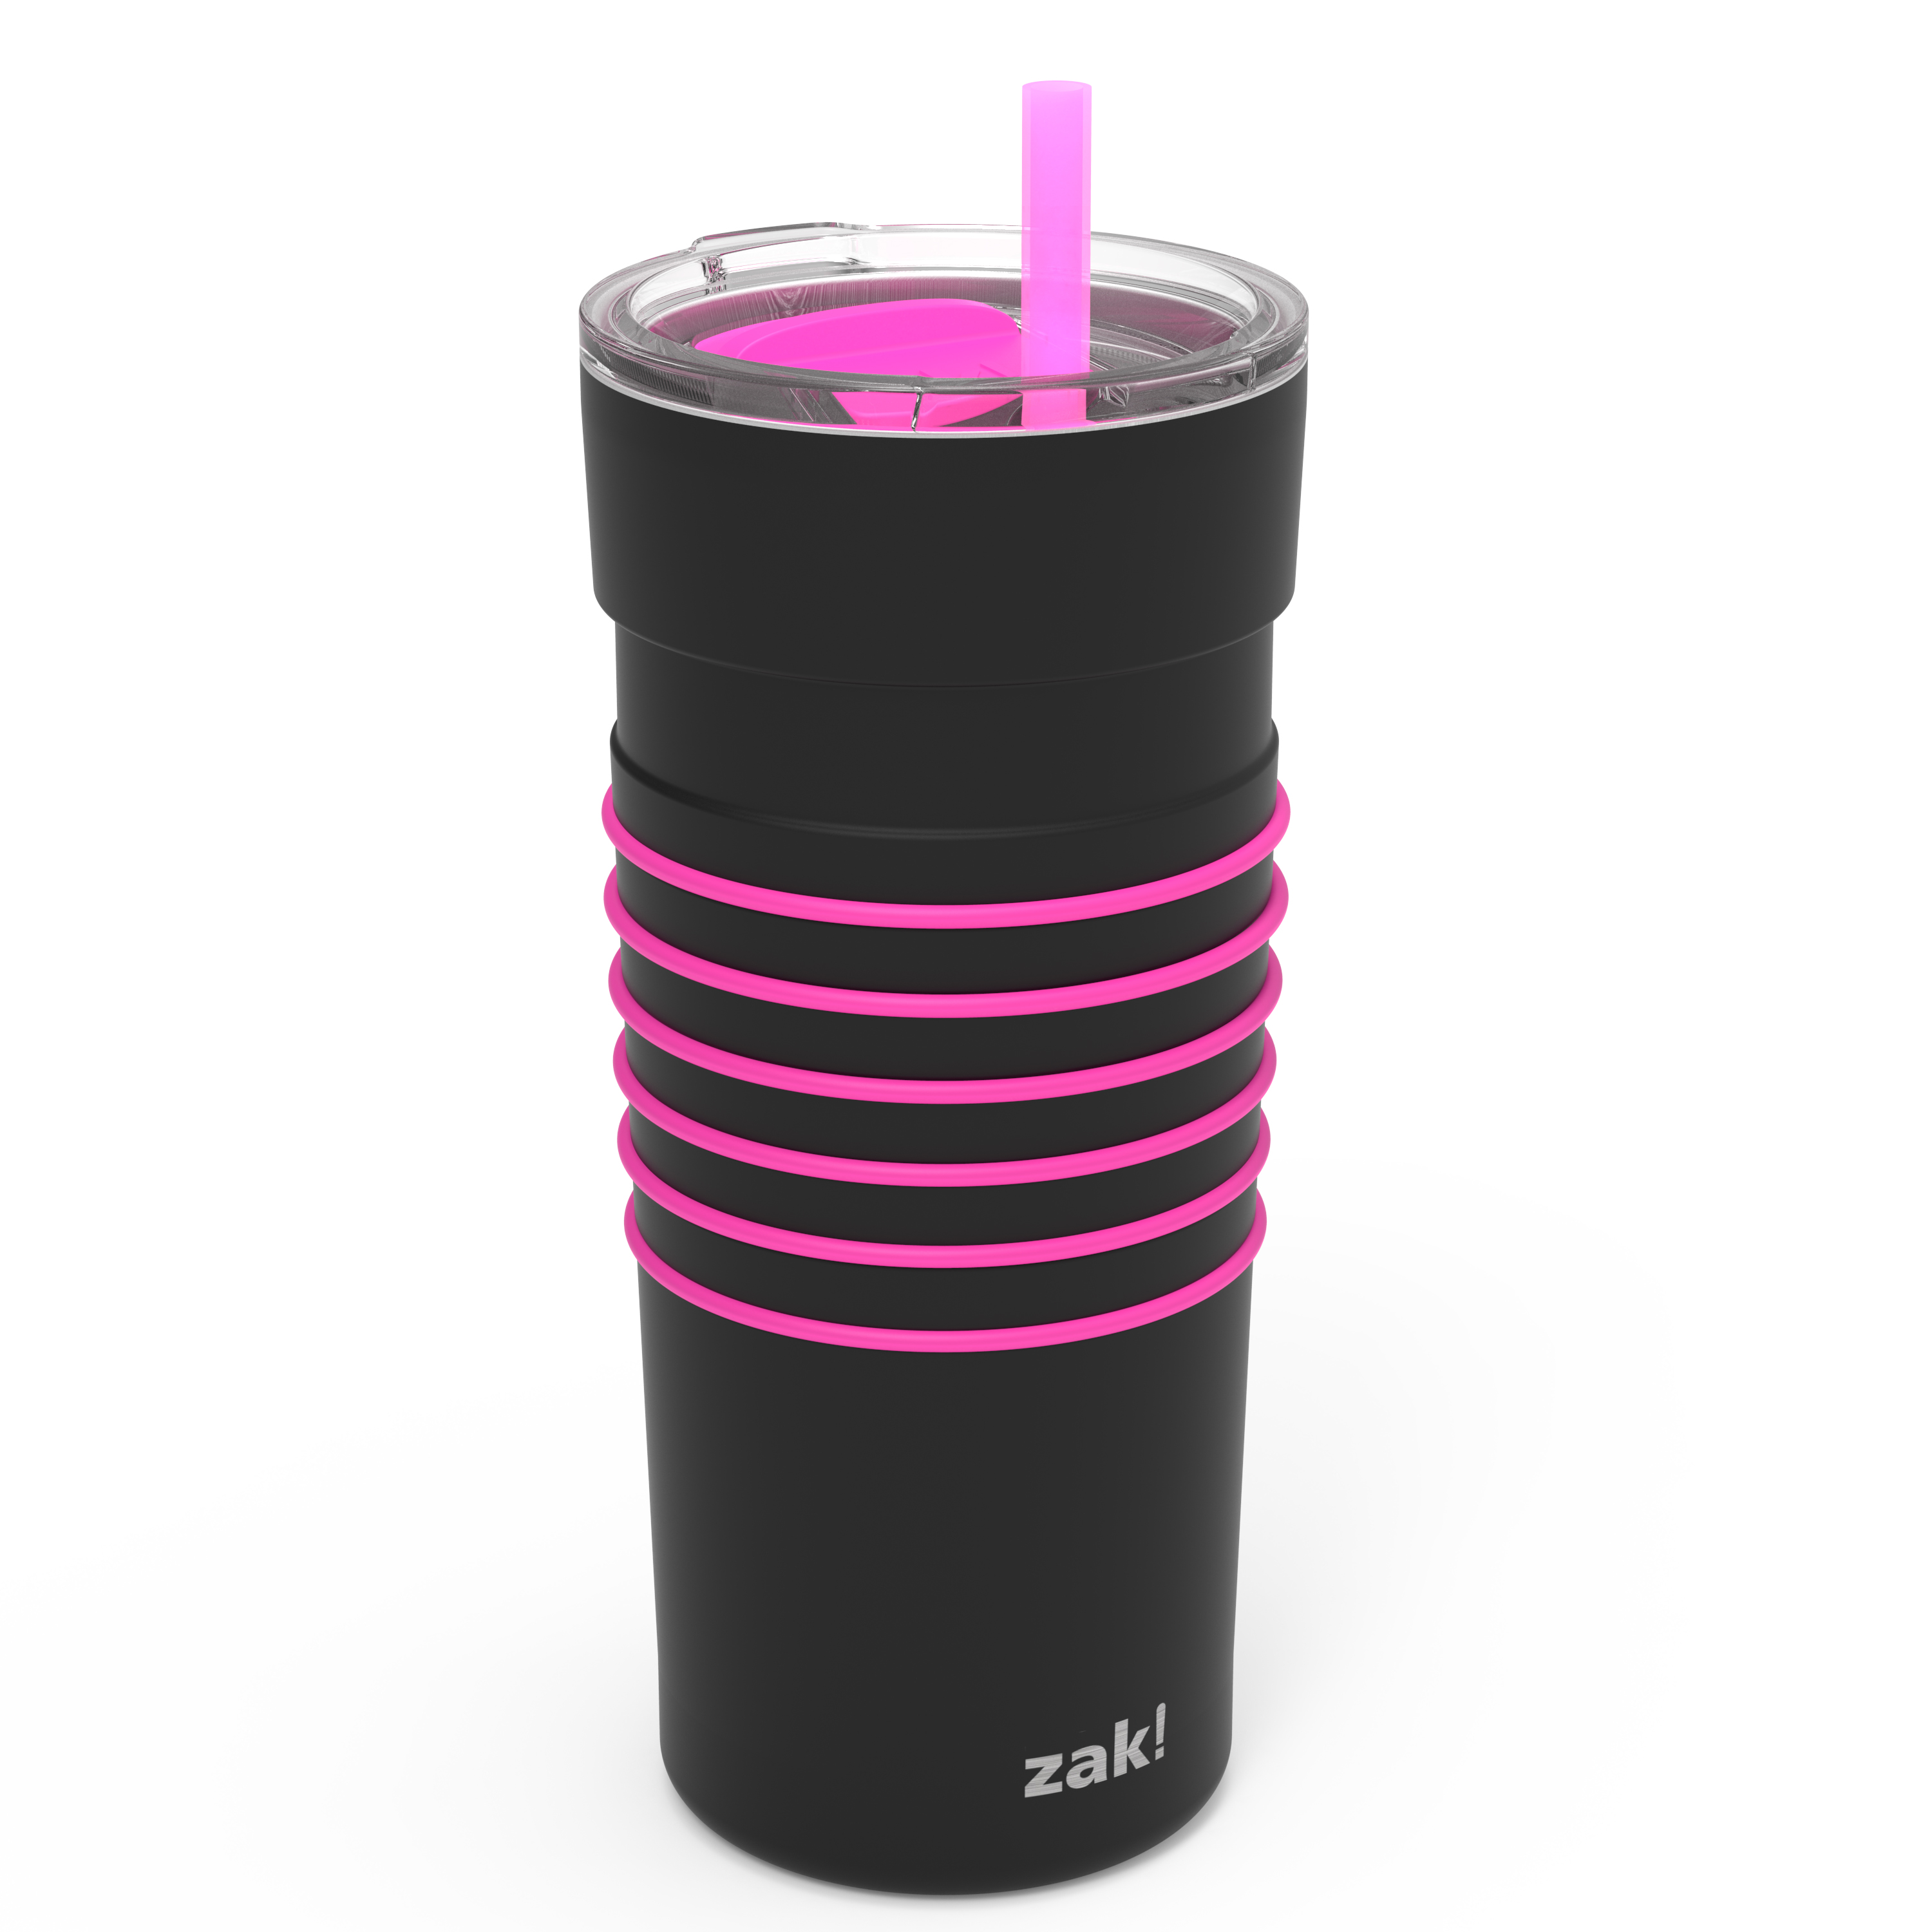 HydraTrak 20 ounce Vacuum Insulated Stainless Steel Tumbler, Black with Pink Rings slideshow image 1